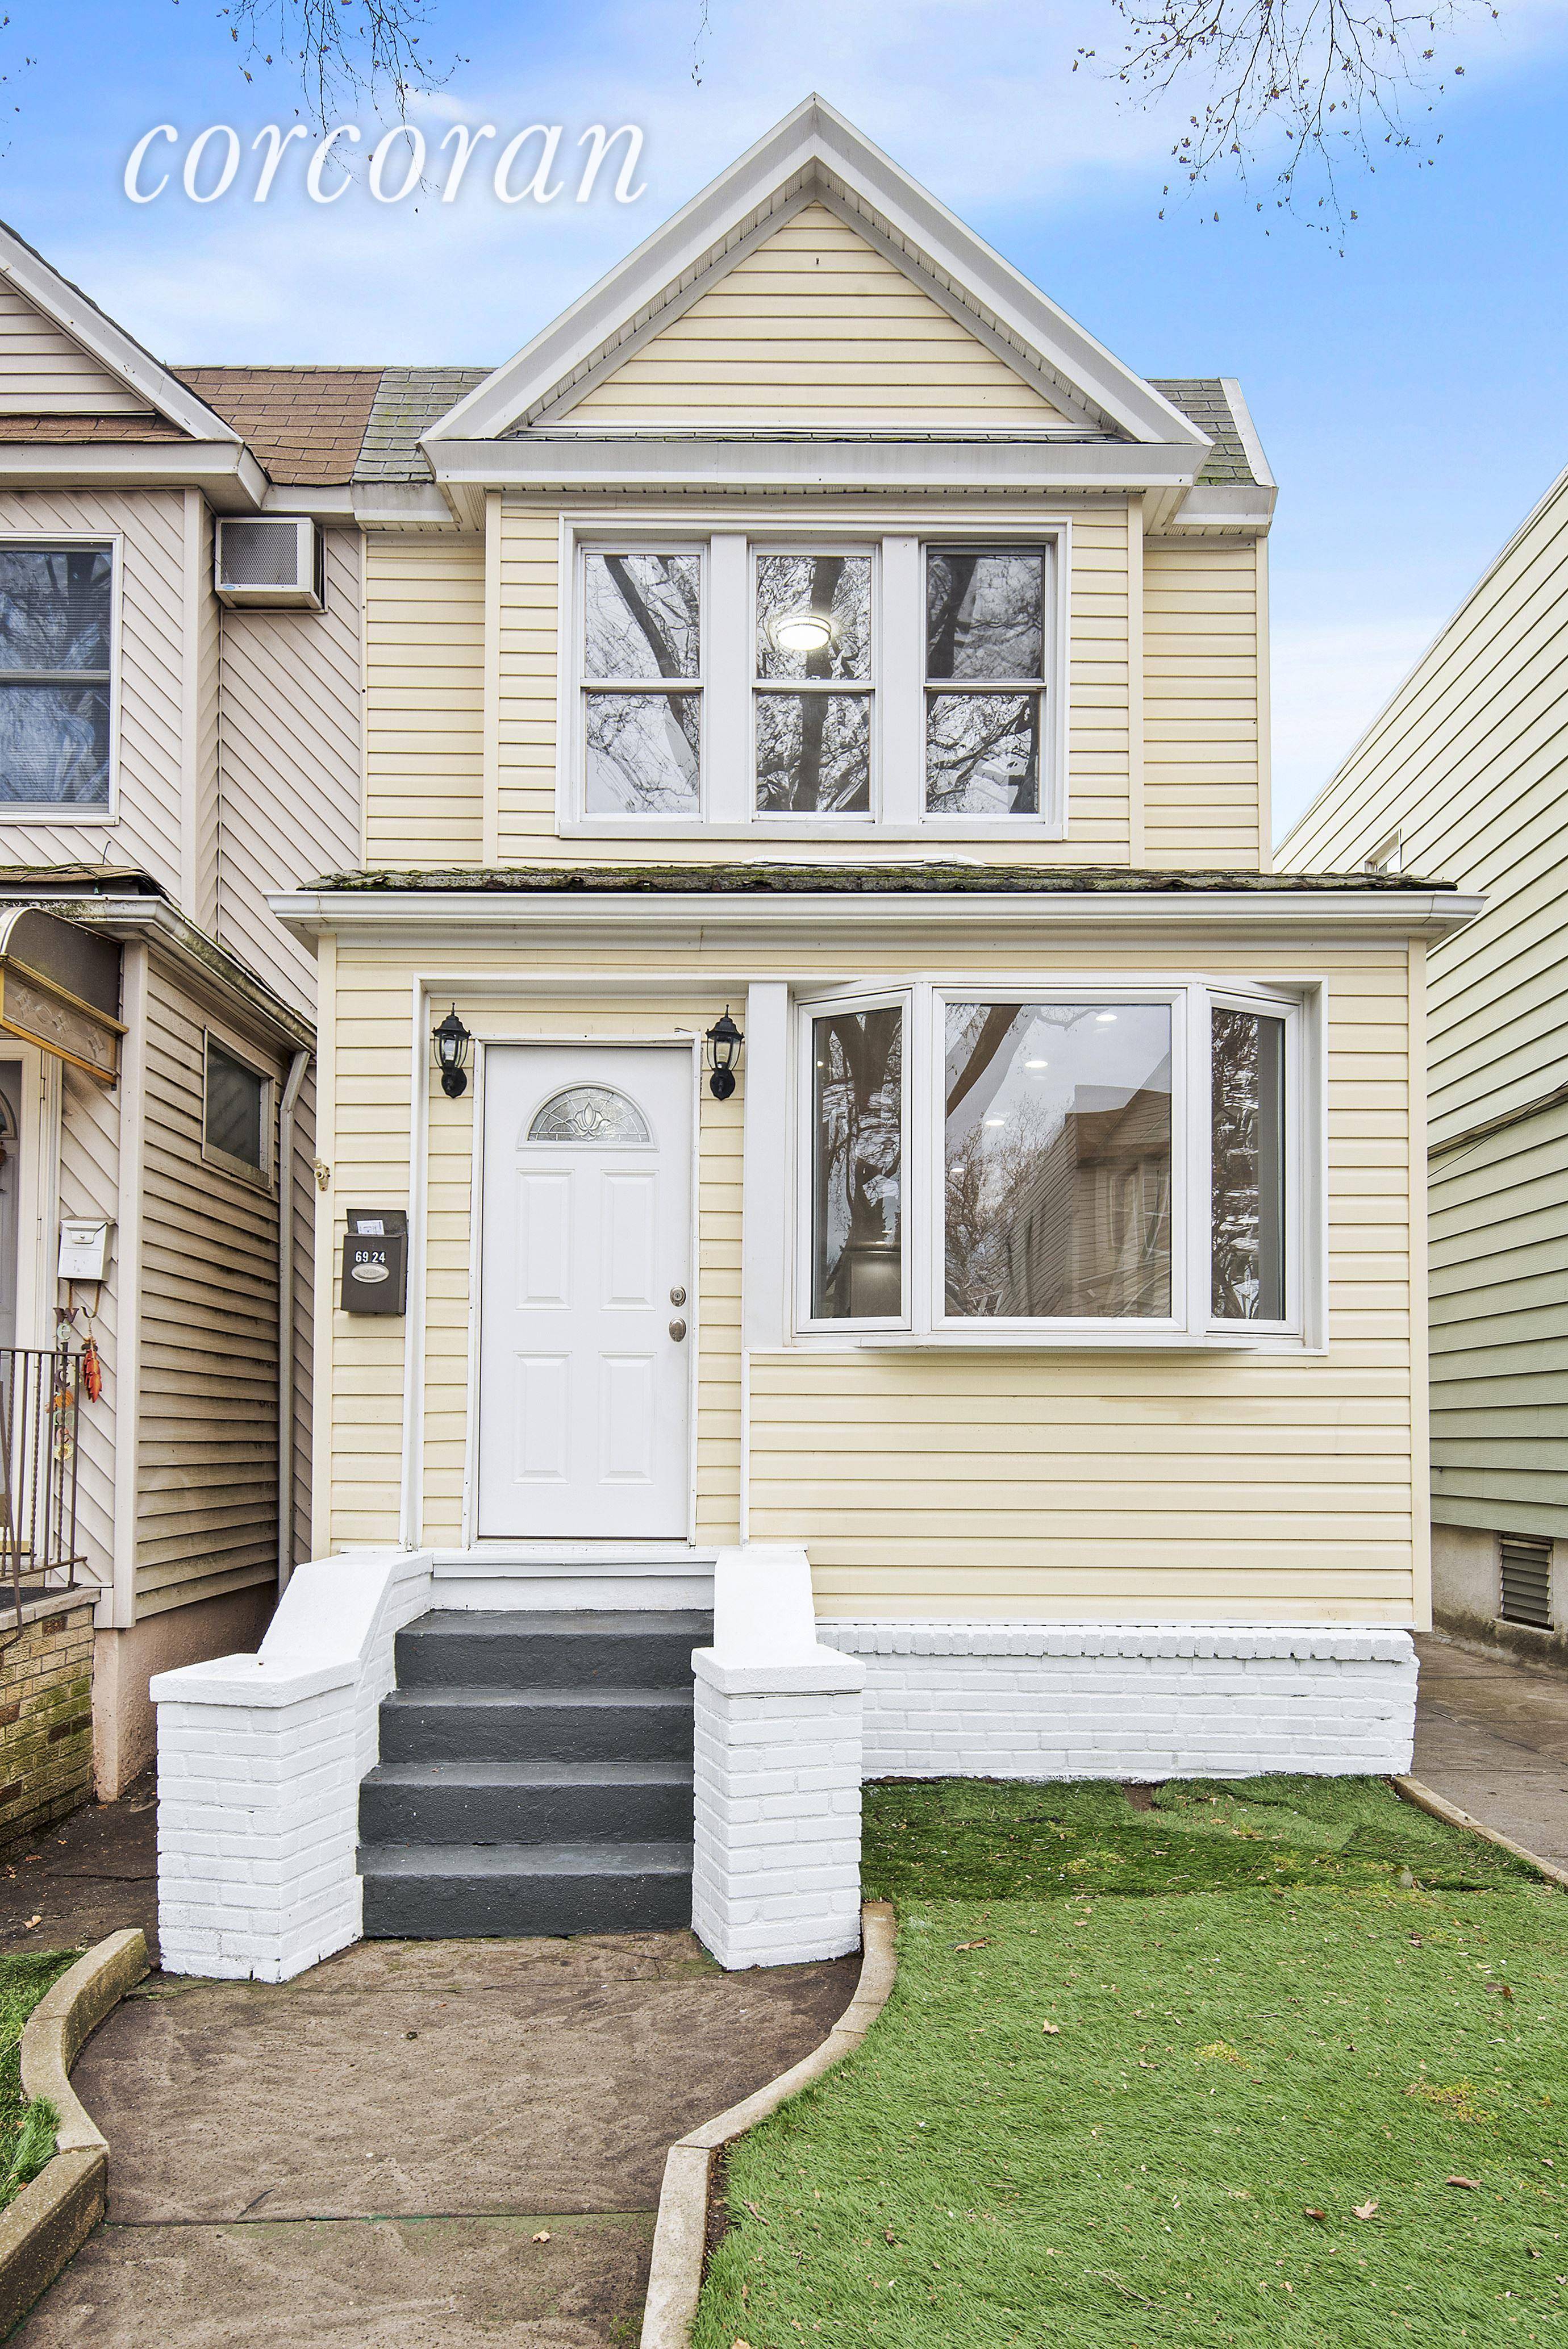 Welcome home to 69 24 66th Place, a newly renovated and super sunny three bedroom home on the cusp of Ridgewood amp ; Glendale, with a shared driveway !